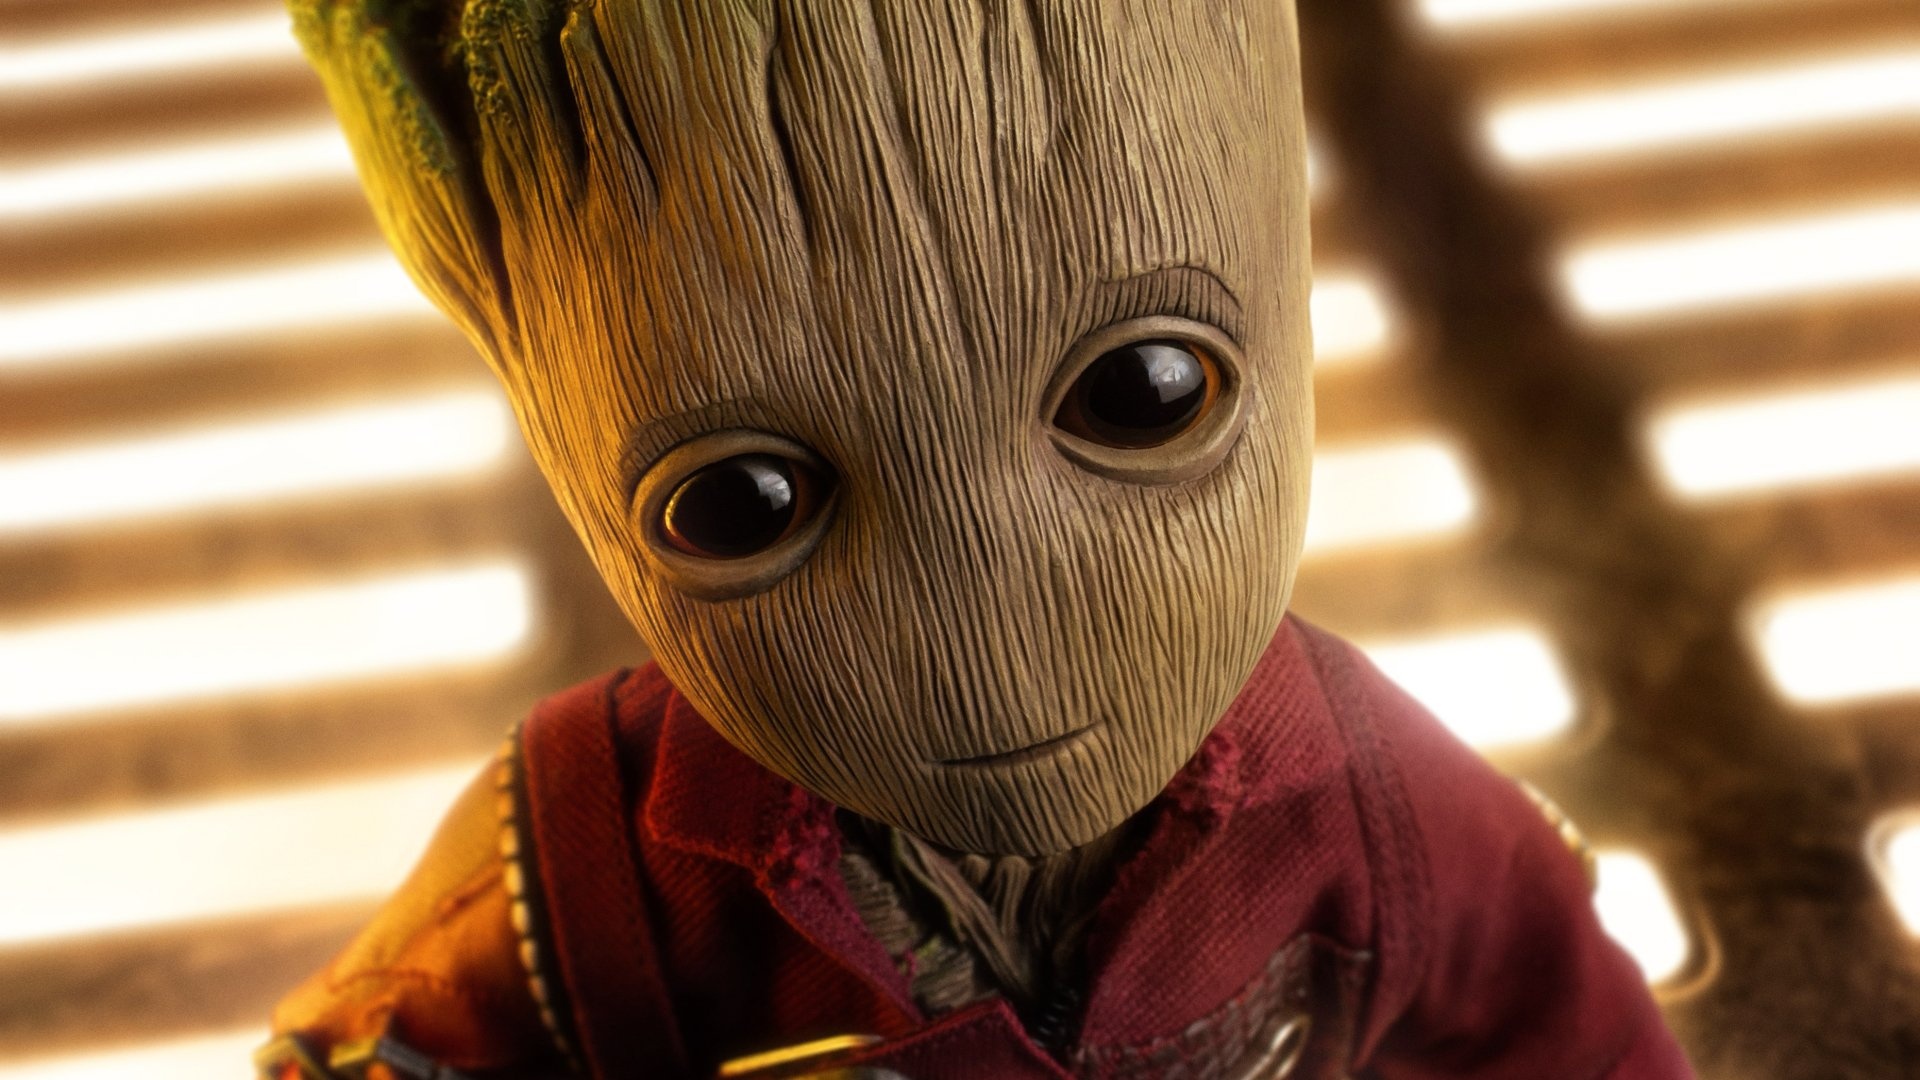 Groot HD wallpapers, Background images, Marvel character, Artistic portrayal, 1920x1080 Full HD Desktop